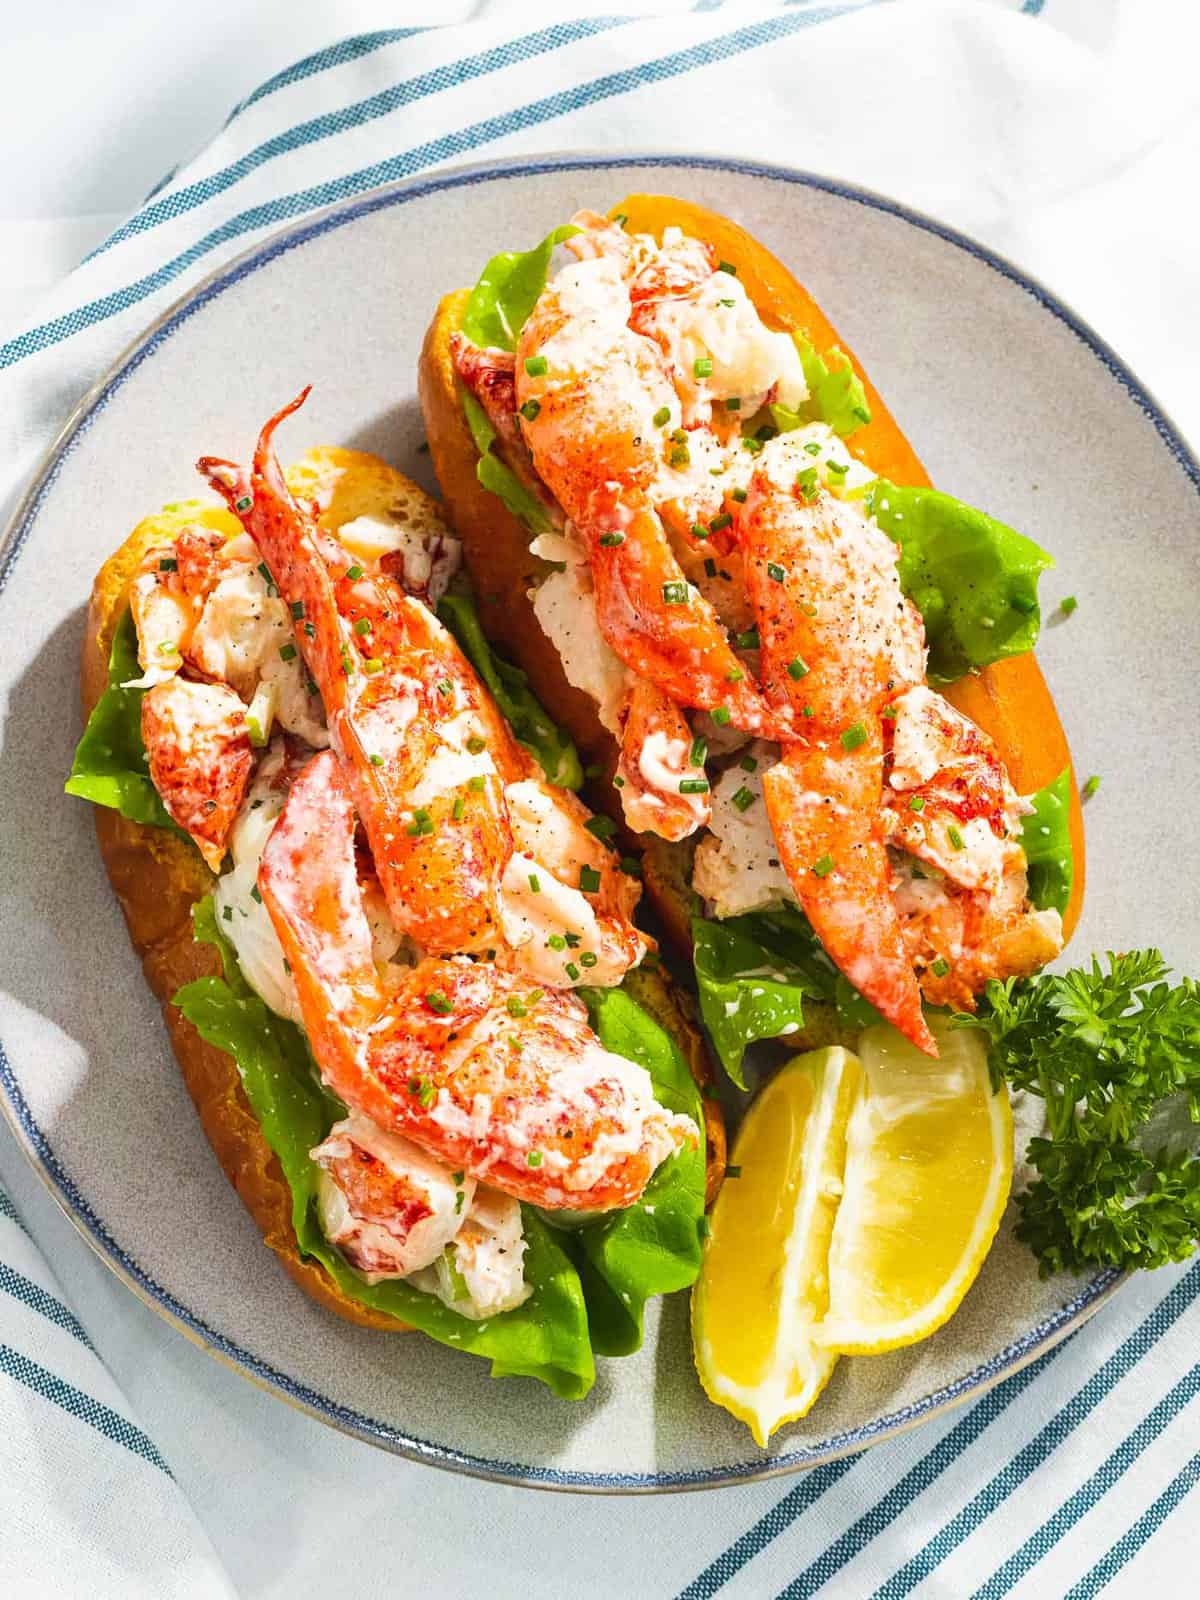 Maine lobster rolls on a plate next to lemons.